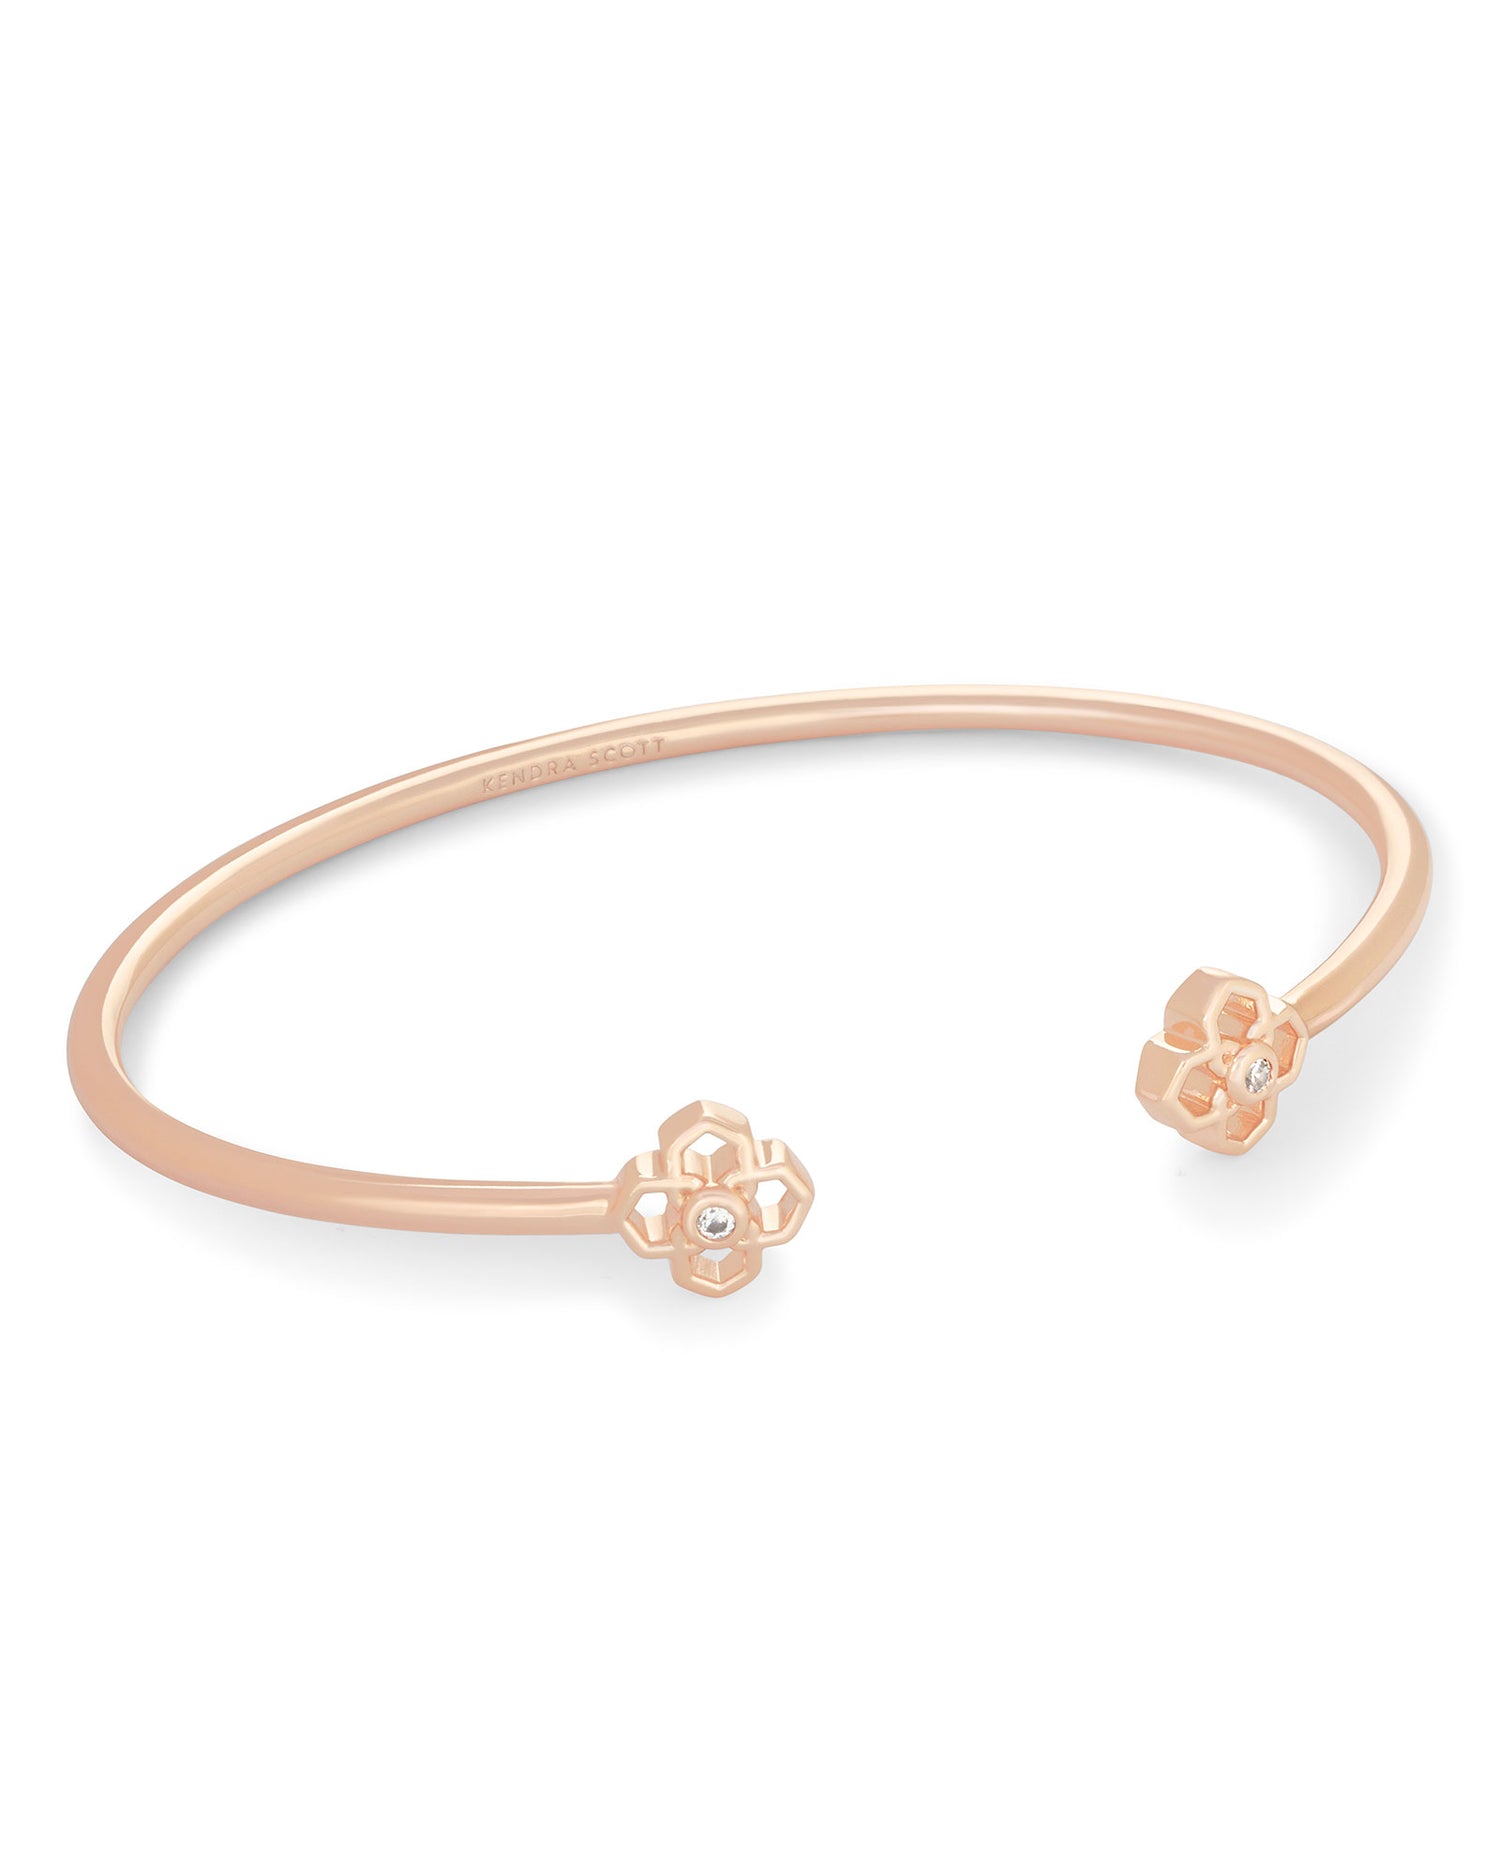 Buy Kendra Scott Edie Cuff Bracelet in Black Opaque Glass, 14k Gold-Plated  at Amazon.in